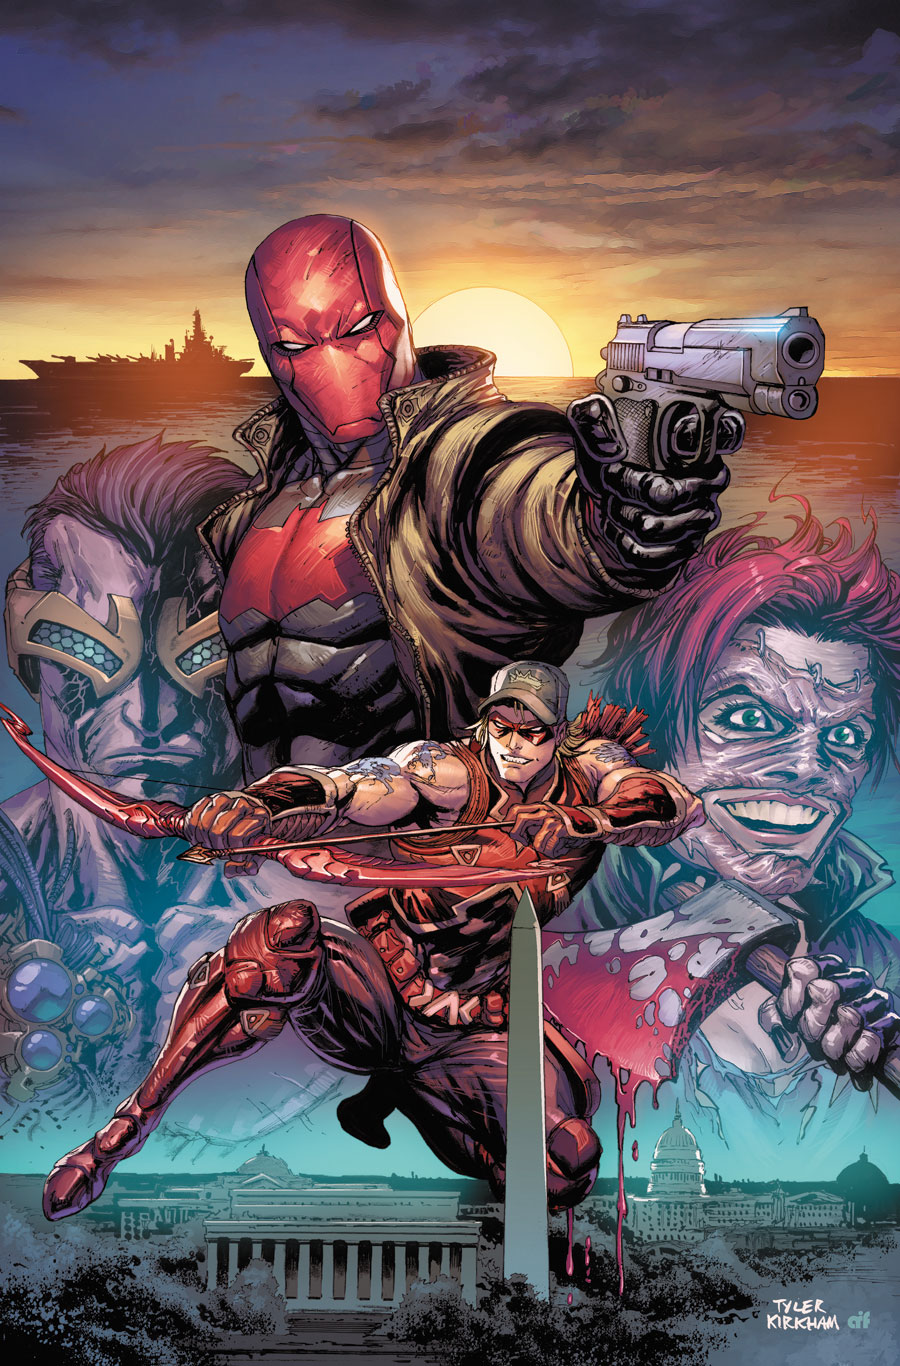 red hood and arsenal vol 1